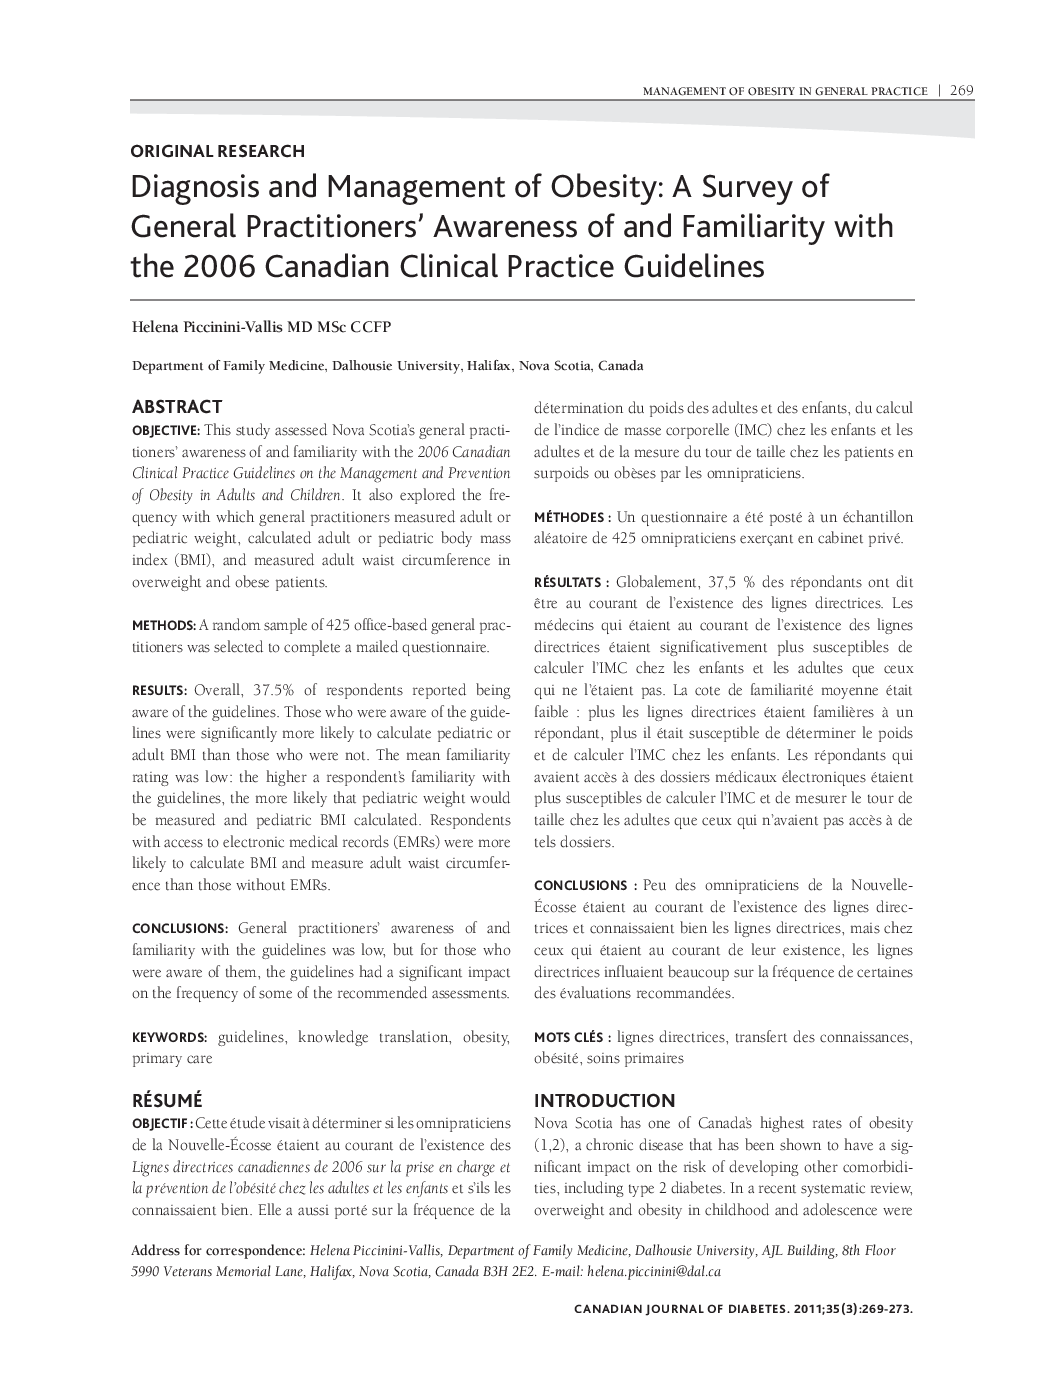 Diagnosis Management of Obesity: A Survey of General Practitioners' Awareness of Familiarity with the 2006 Canadian Clinical Practice Guidelines